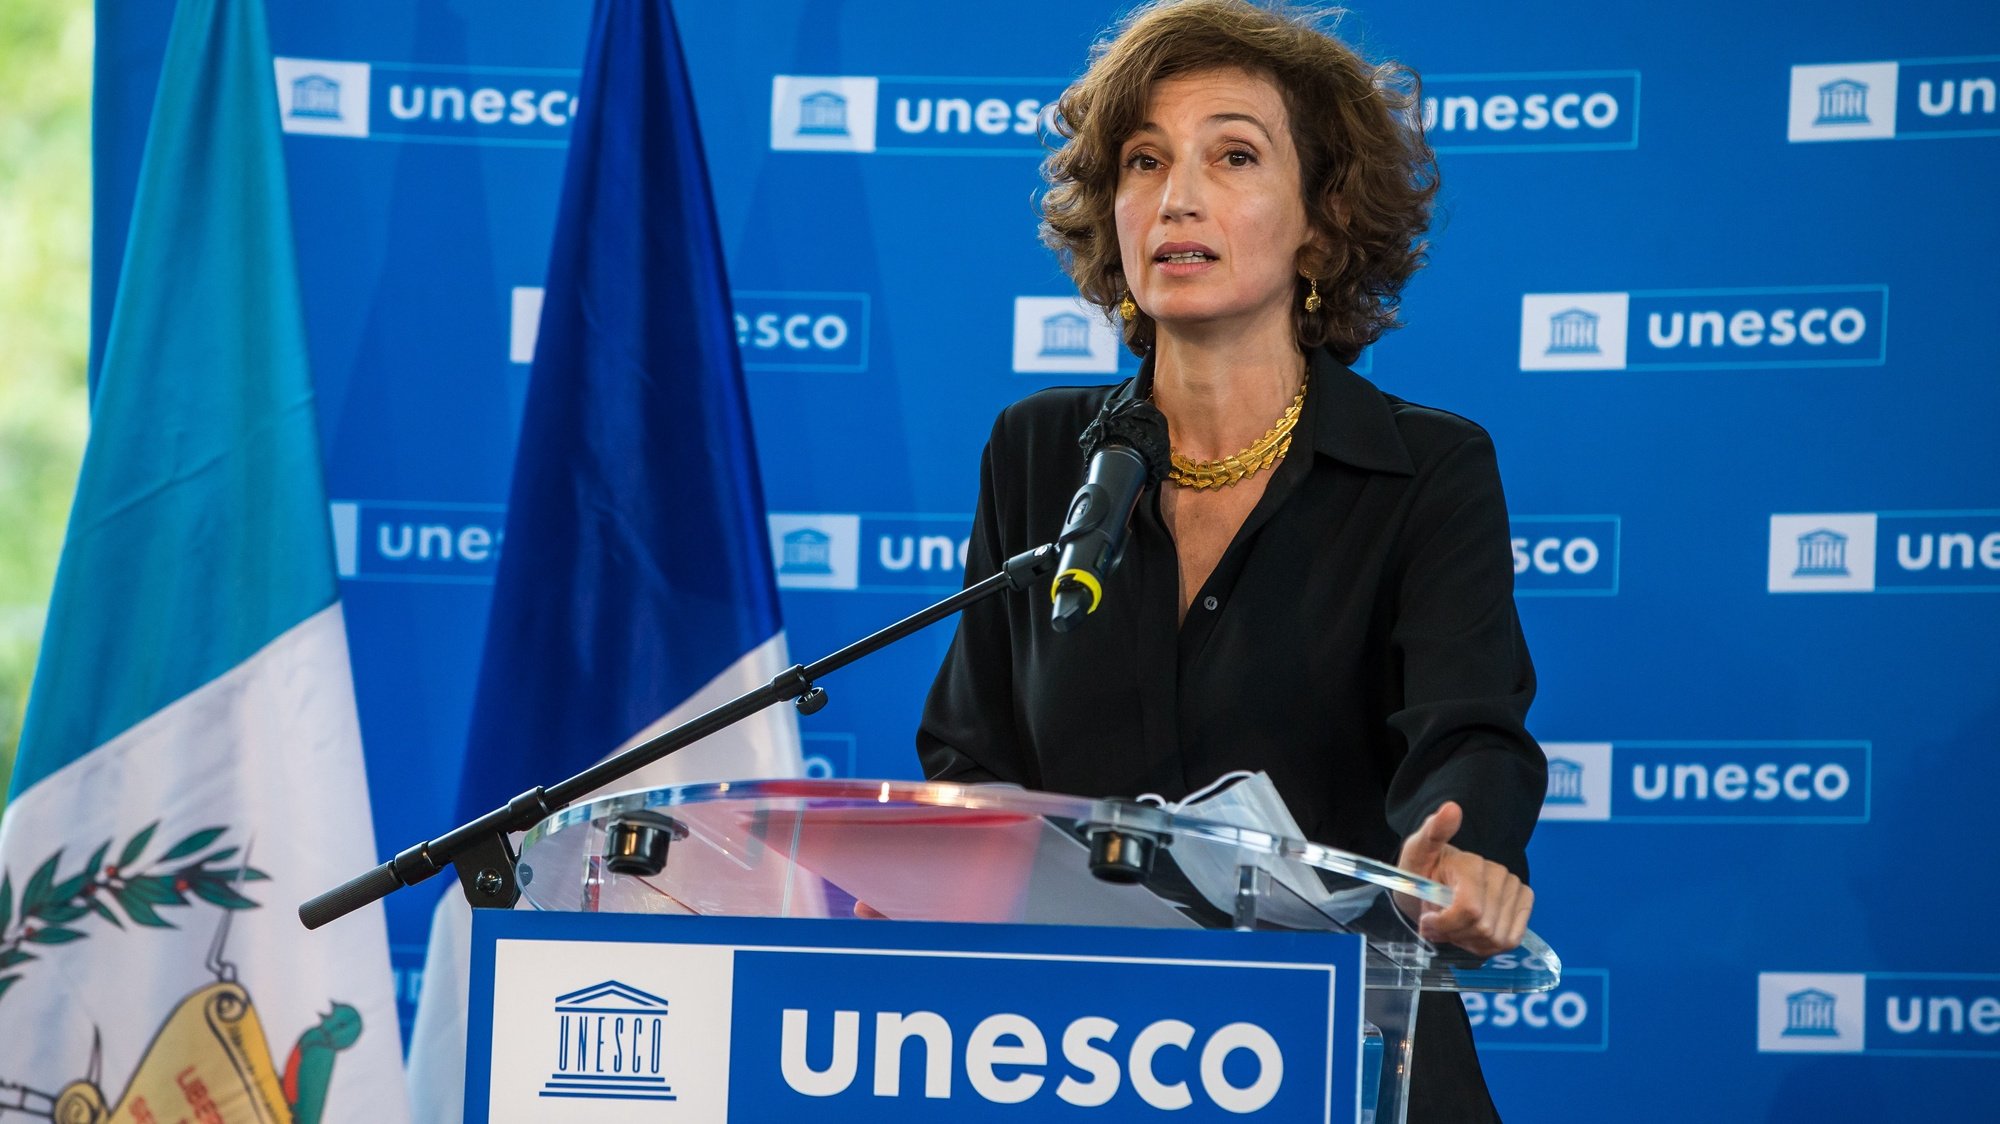 epa09545581 UNESCO Director-General Audrey Azoulay delivers a speech during an handover ceremony at Unesco headquarter, in Paris, France, 25 October 2021. Unesco hosted a ceremony for the voluntary handover by a French private collector of a fragment of a stela from the Piedras Negras archaeological site to the Ambassador of Guatemala to Unesco.  EPA/CHRISTOPHE PETIT TESSON